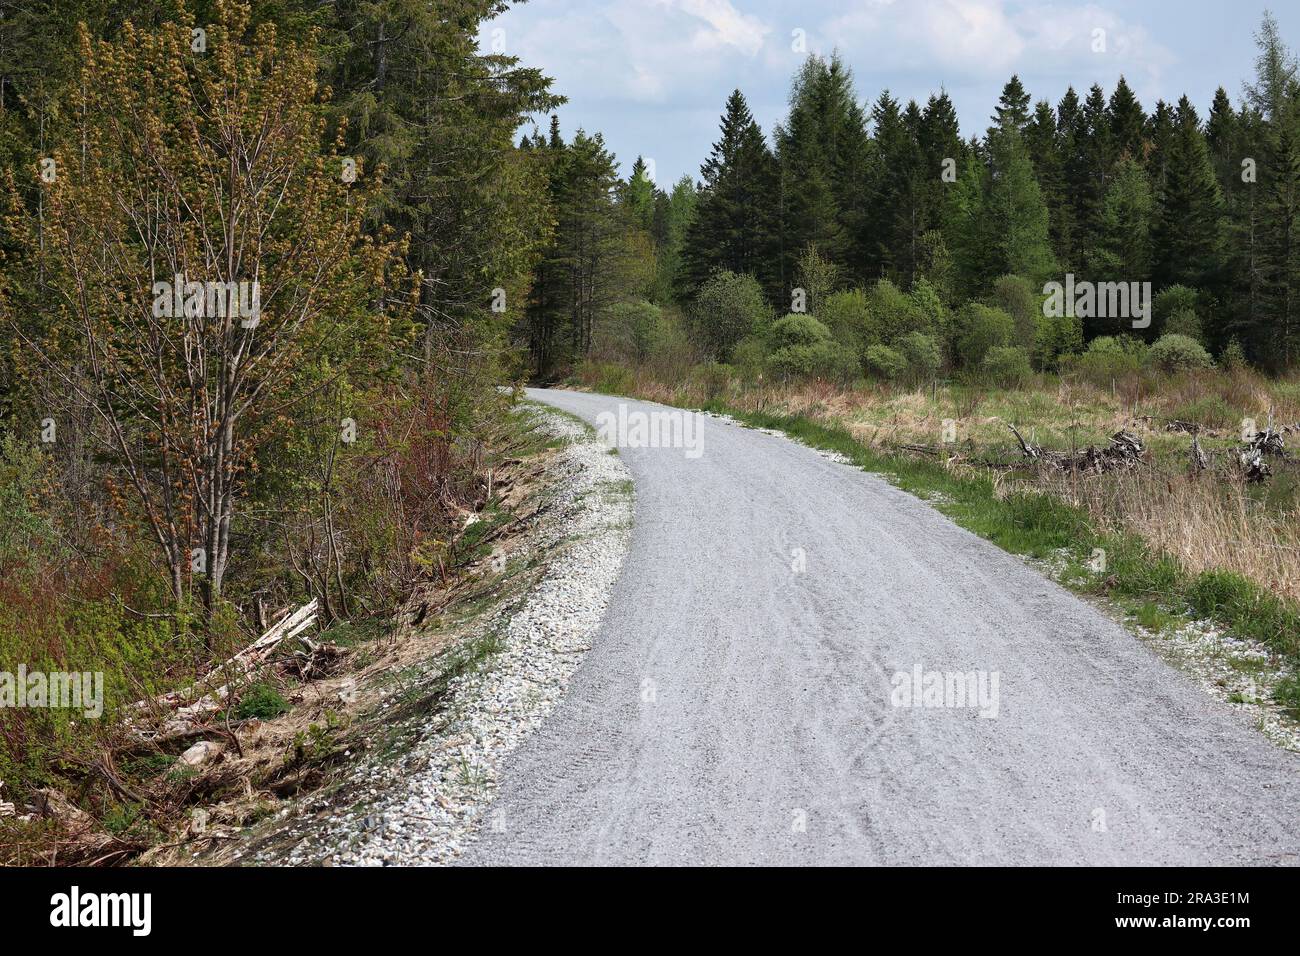 gravel bike trail through a wooded area near swamp on the lamoille valley rail train in vermont (cycling, walking, pedestrian path) Stock Photo